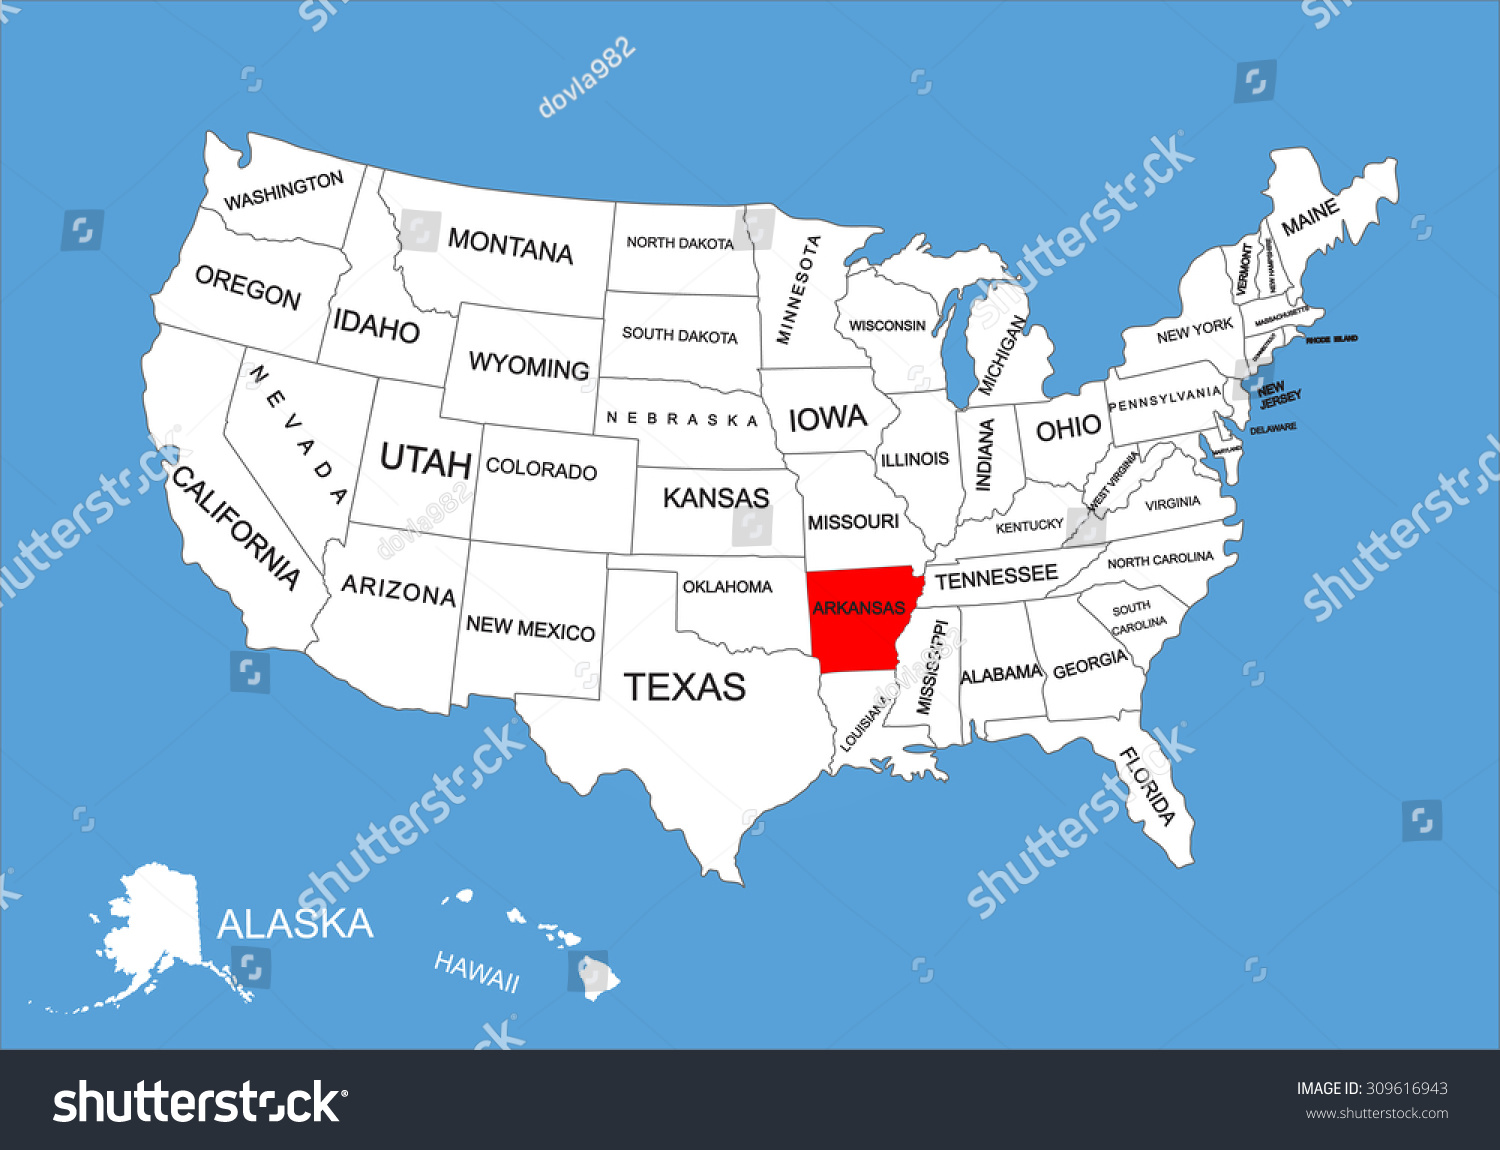 Stock Vector Arkansas State Usa Vector Map Isolated On United States Map Editable Blank Vector Map Of Usa 309616943 